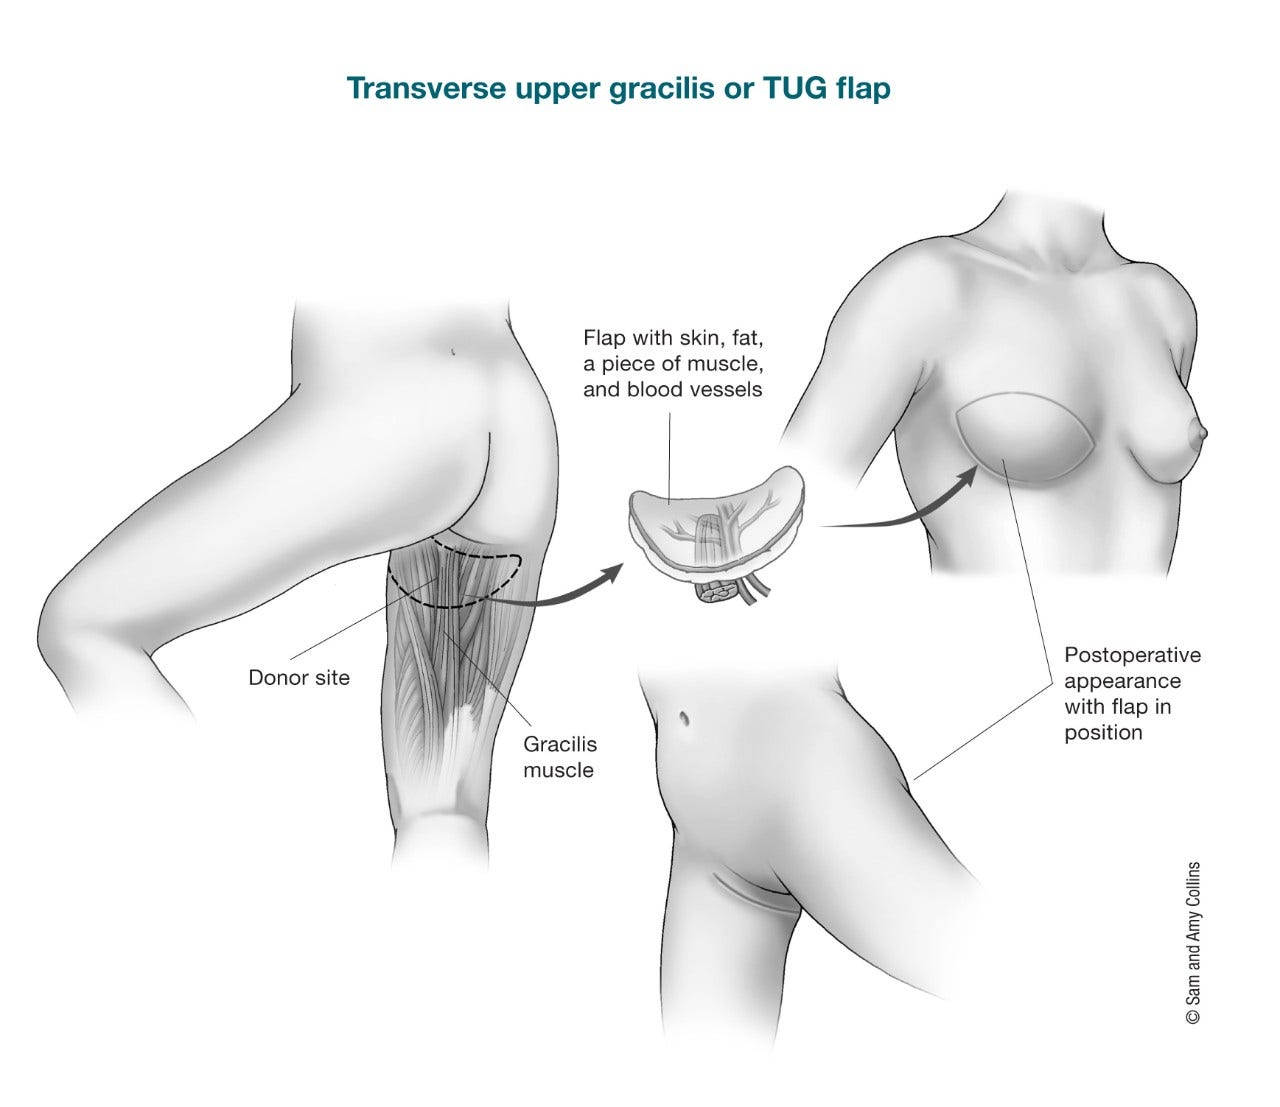 illustration showing the donor site (gracilis muscle), the flap with skin, fat, a piece of muscle and blood vessels and the postoperative appearance with flap in position